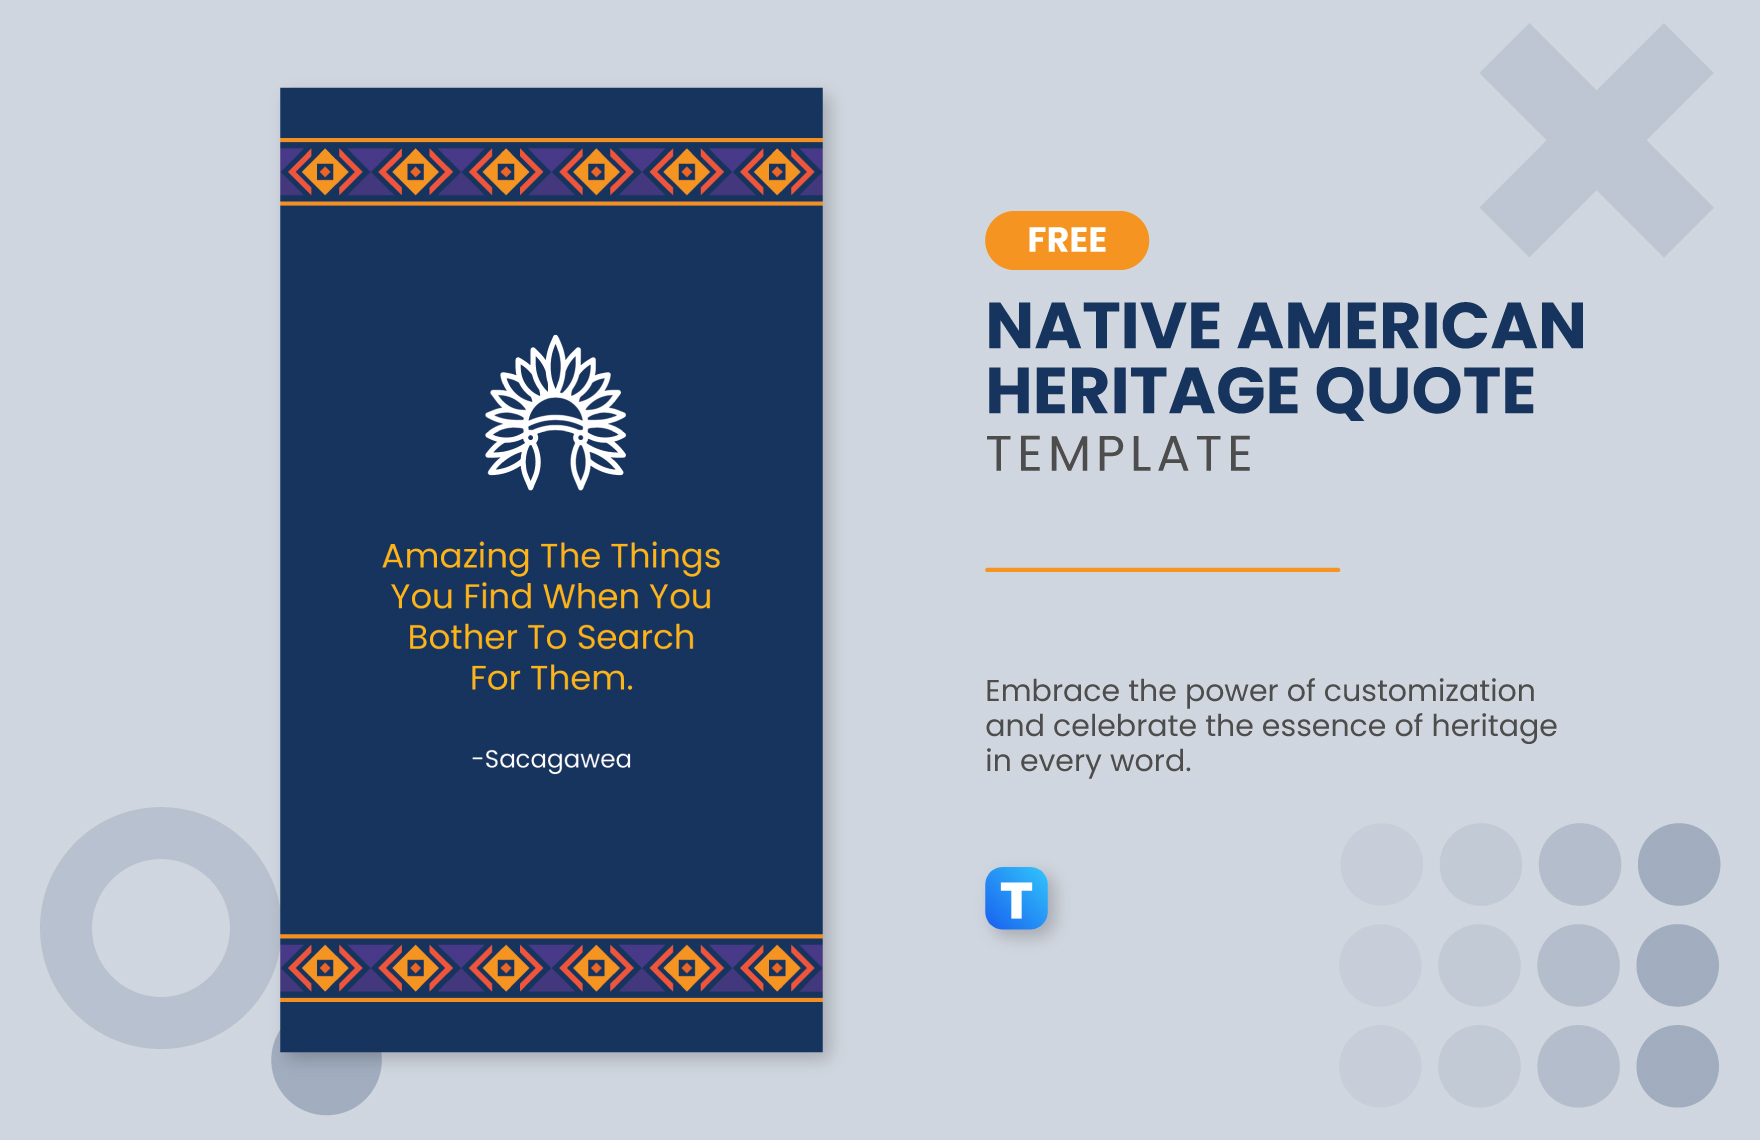 Free Native American Heritage Quote Template